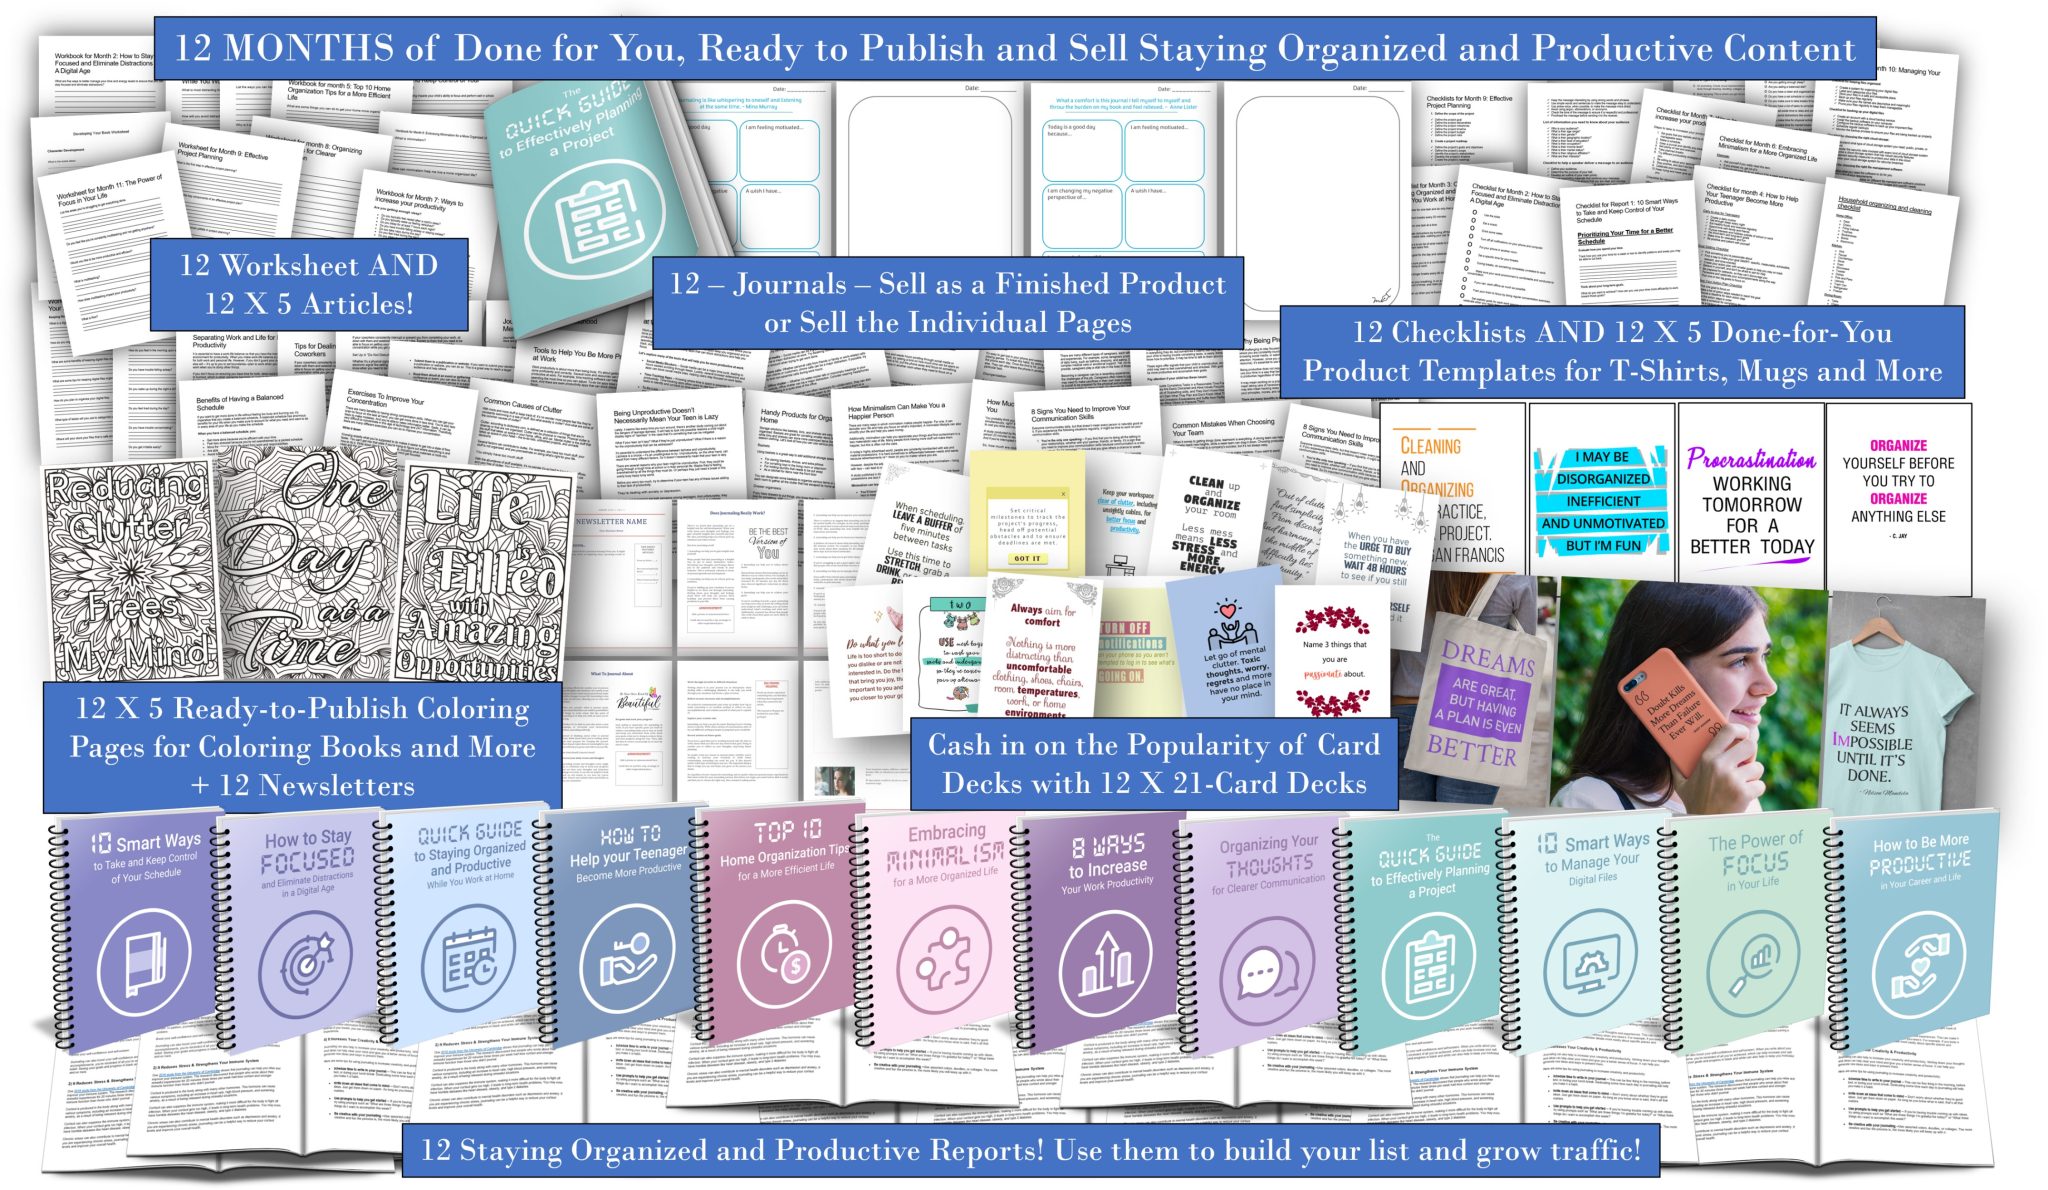 Productivity Content with PLR Rights